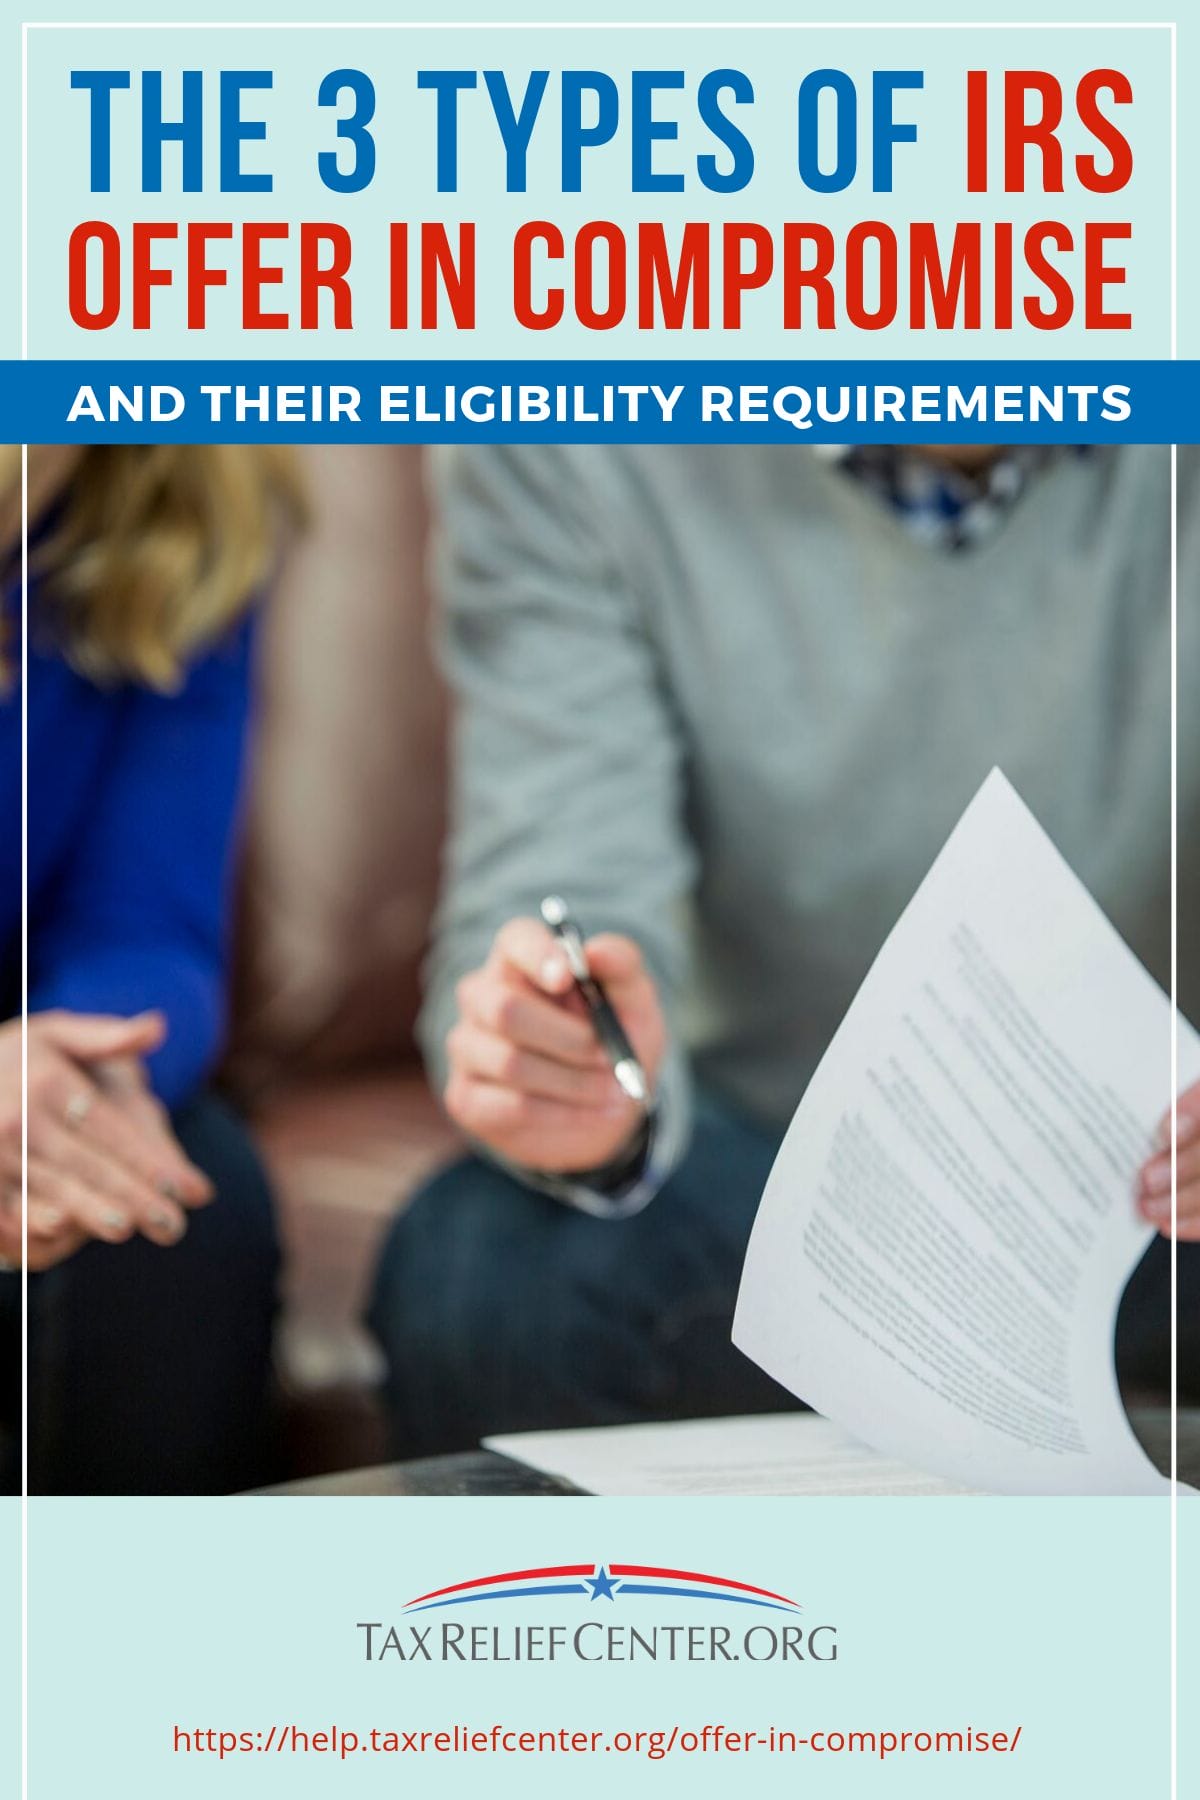 The 3 Types Of IRS Offer In Compromise And Their Eligibility Requirements https://help.taxreliefcenter.org/offer-in-compromise/